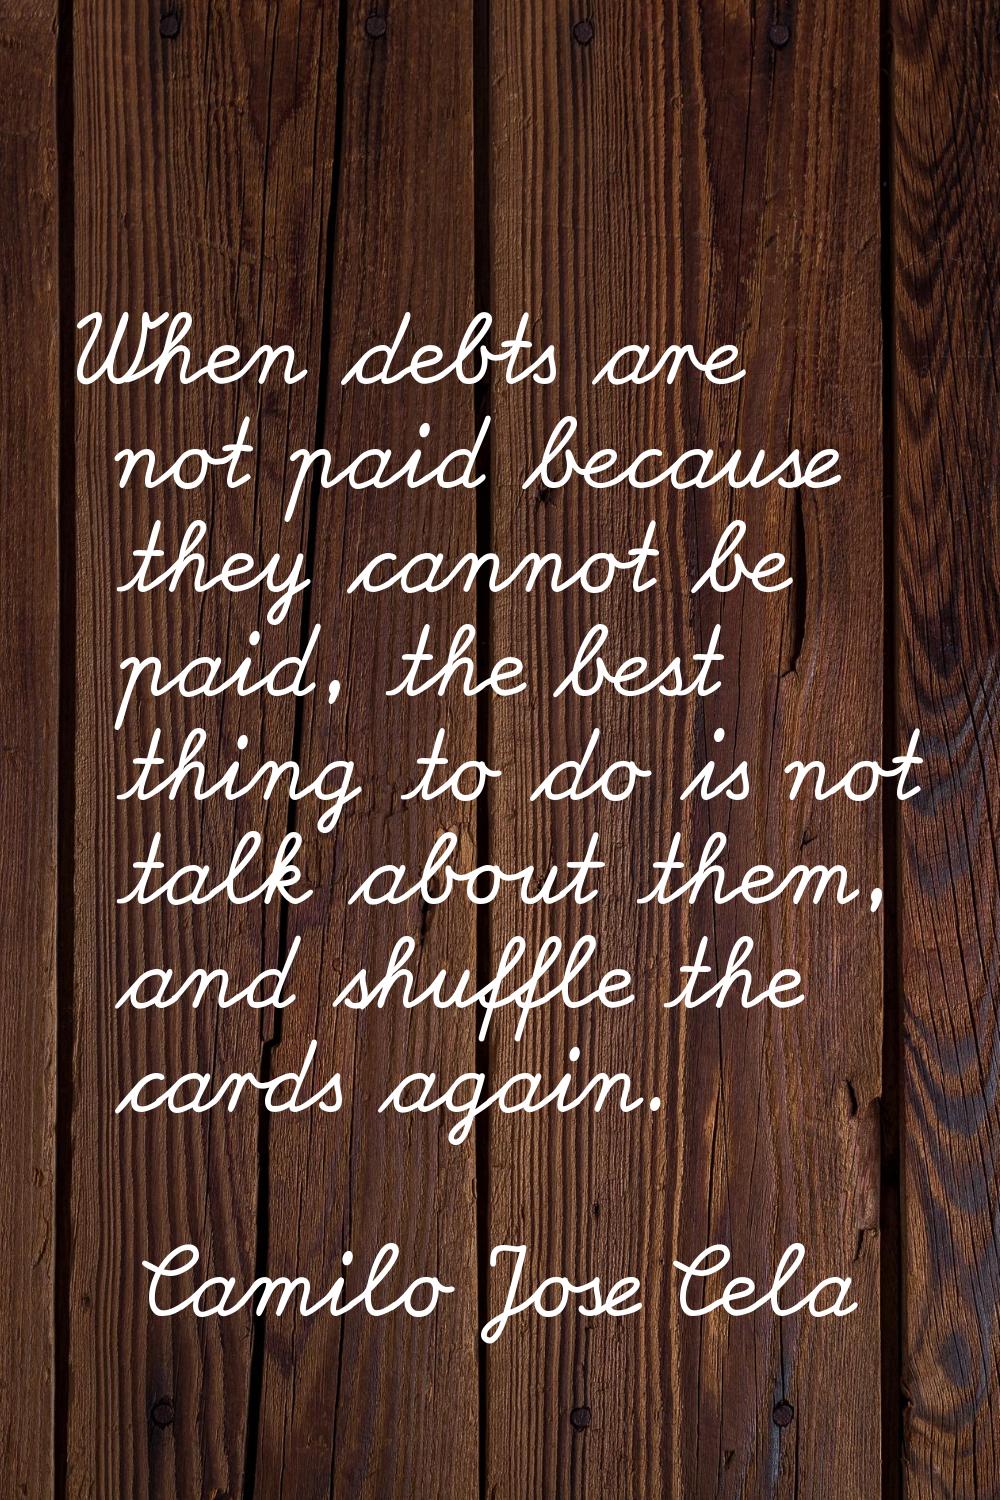 When debts are not paid because they cannot be paid, the best thing to do is not talk about them, a